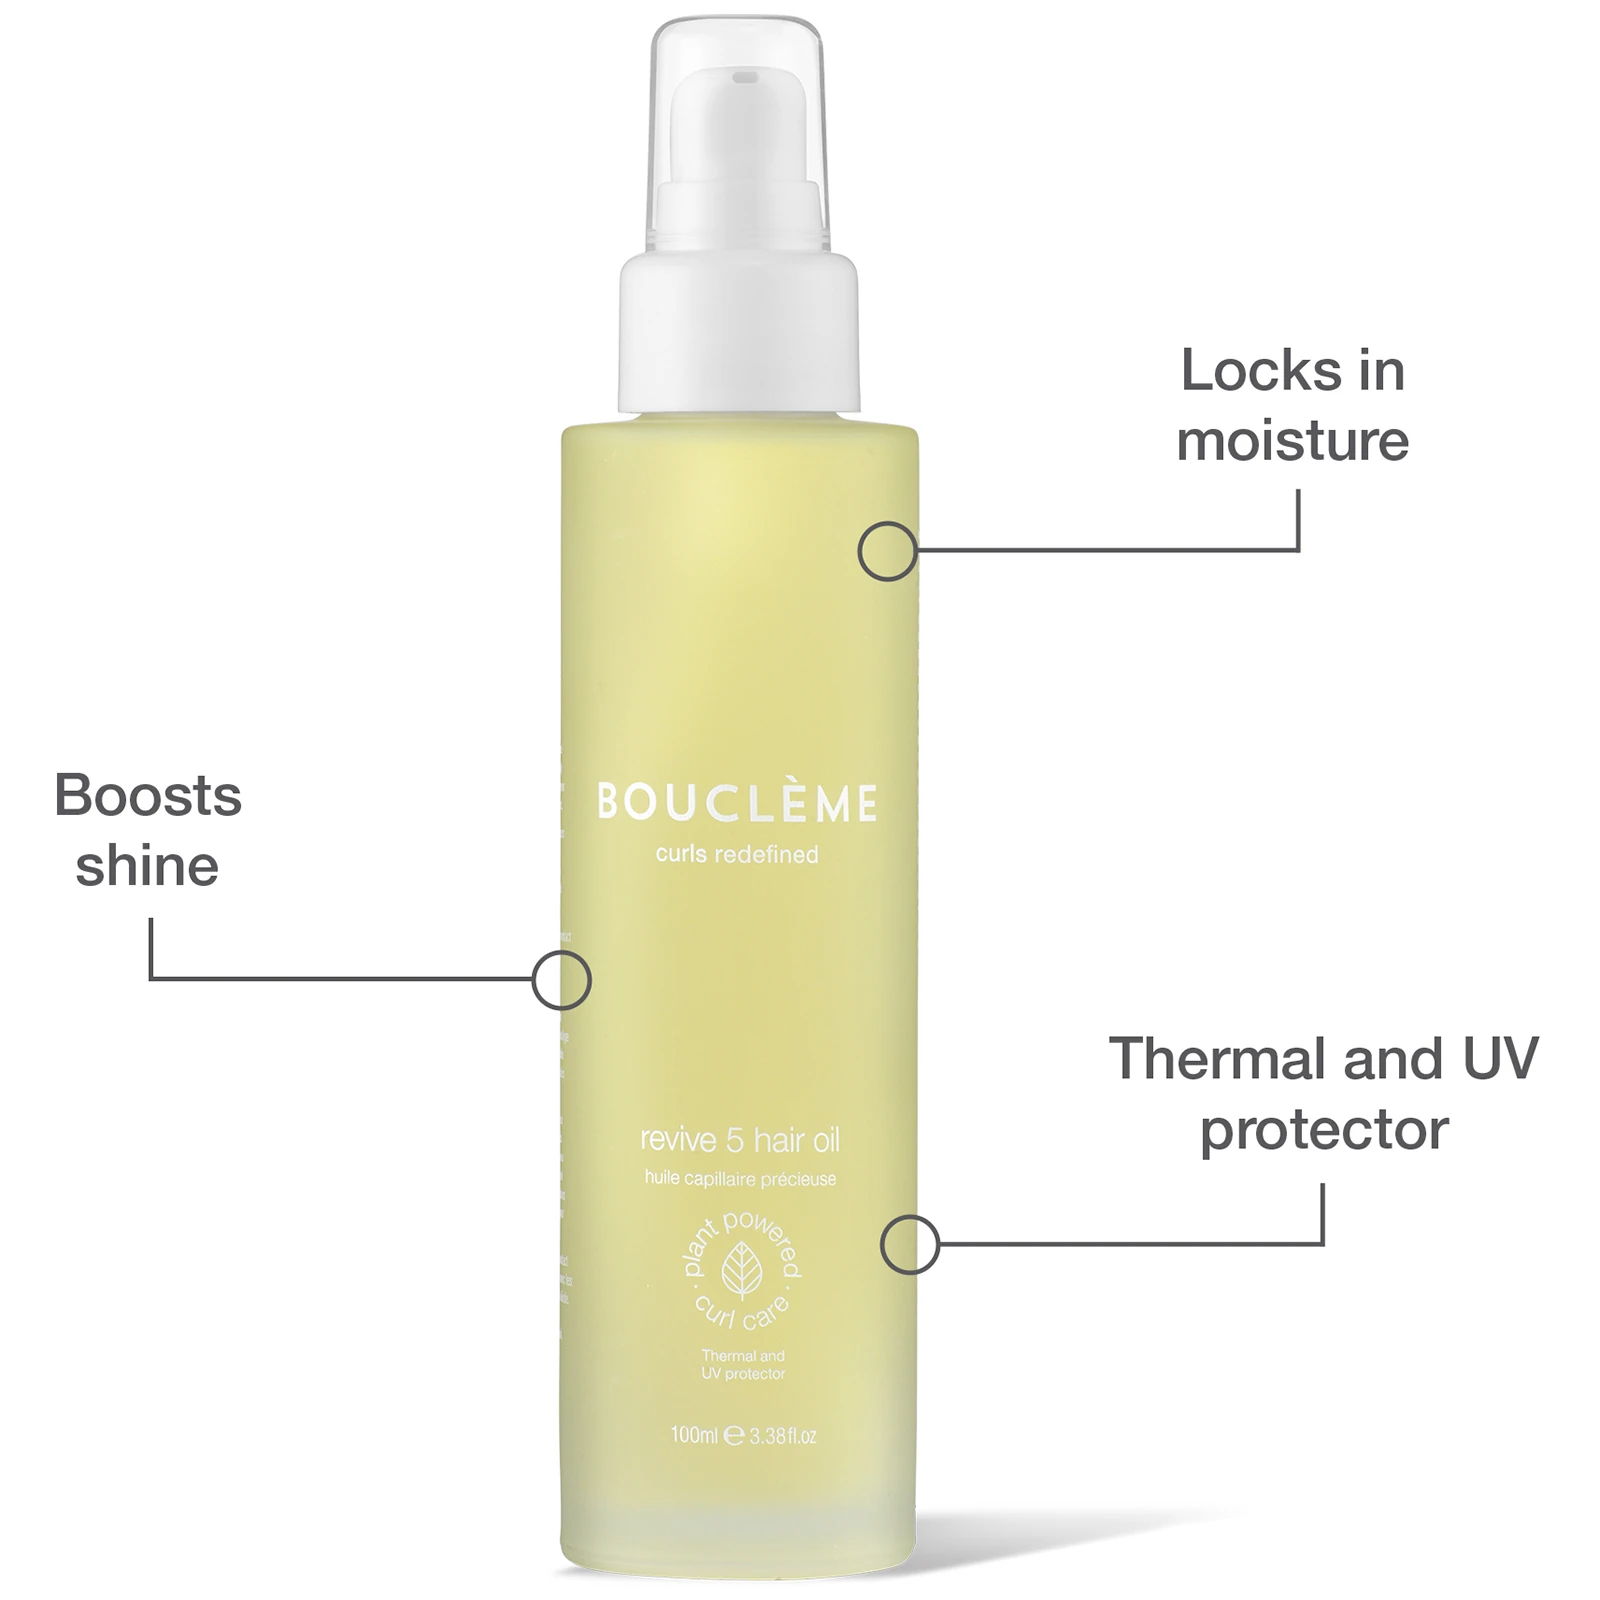 locks in moisture, boosts shine, thermal and UV protector